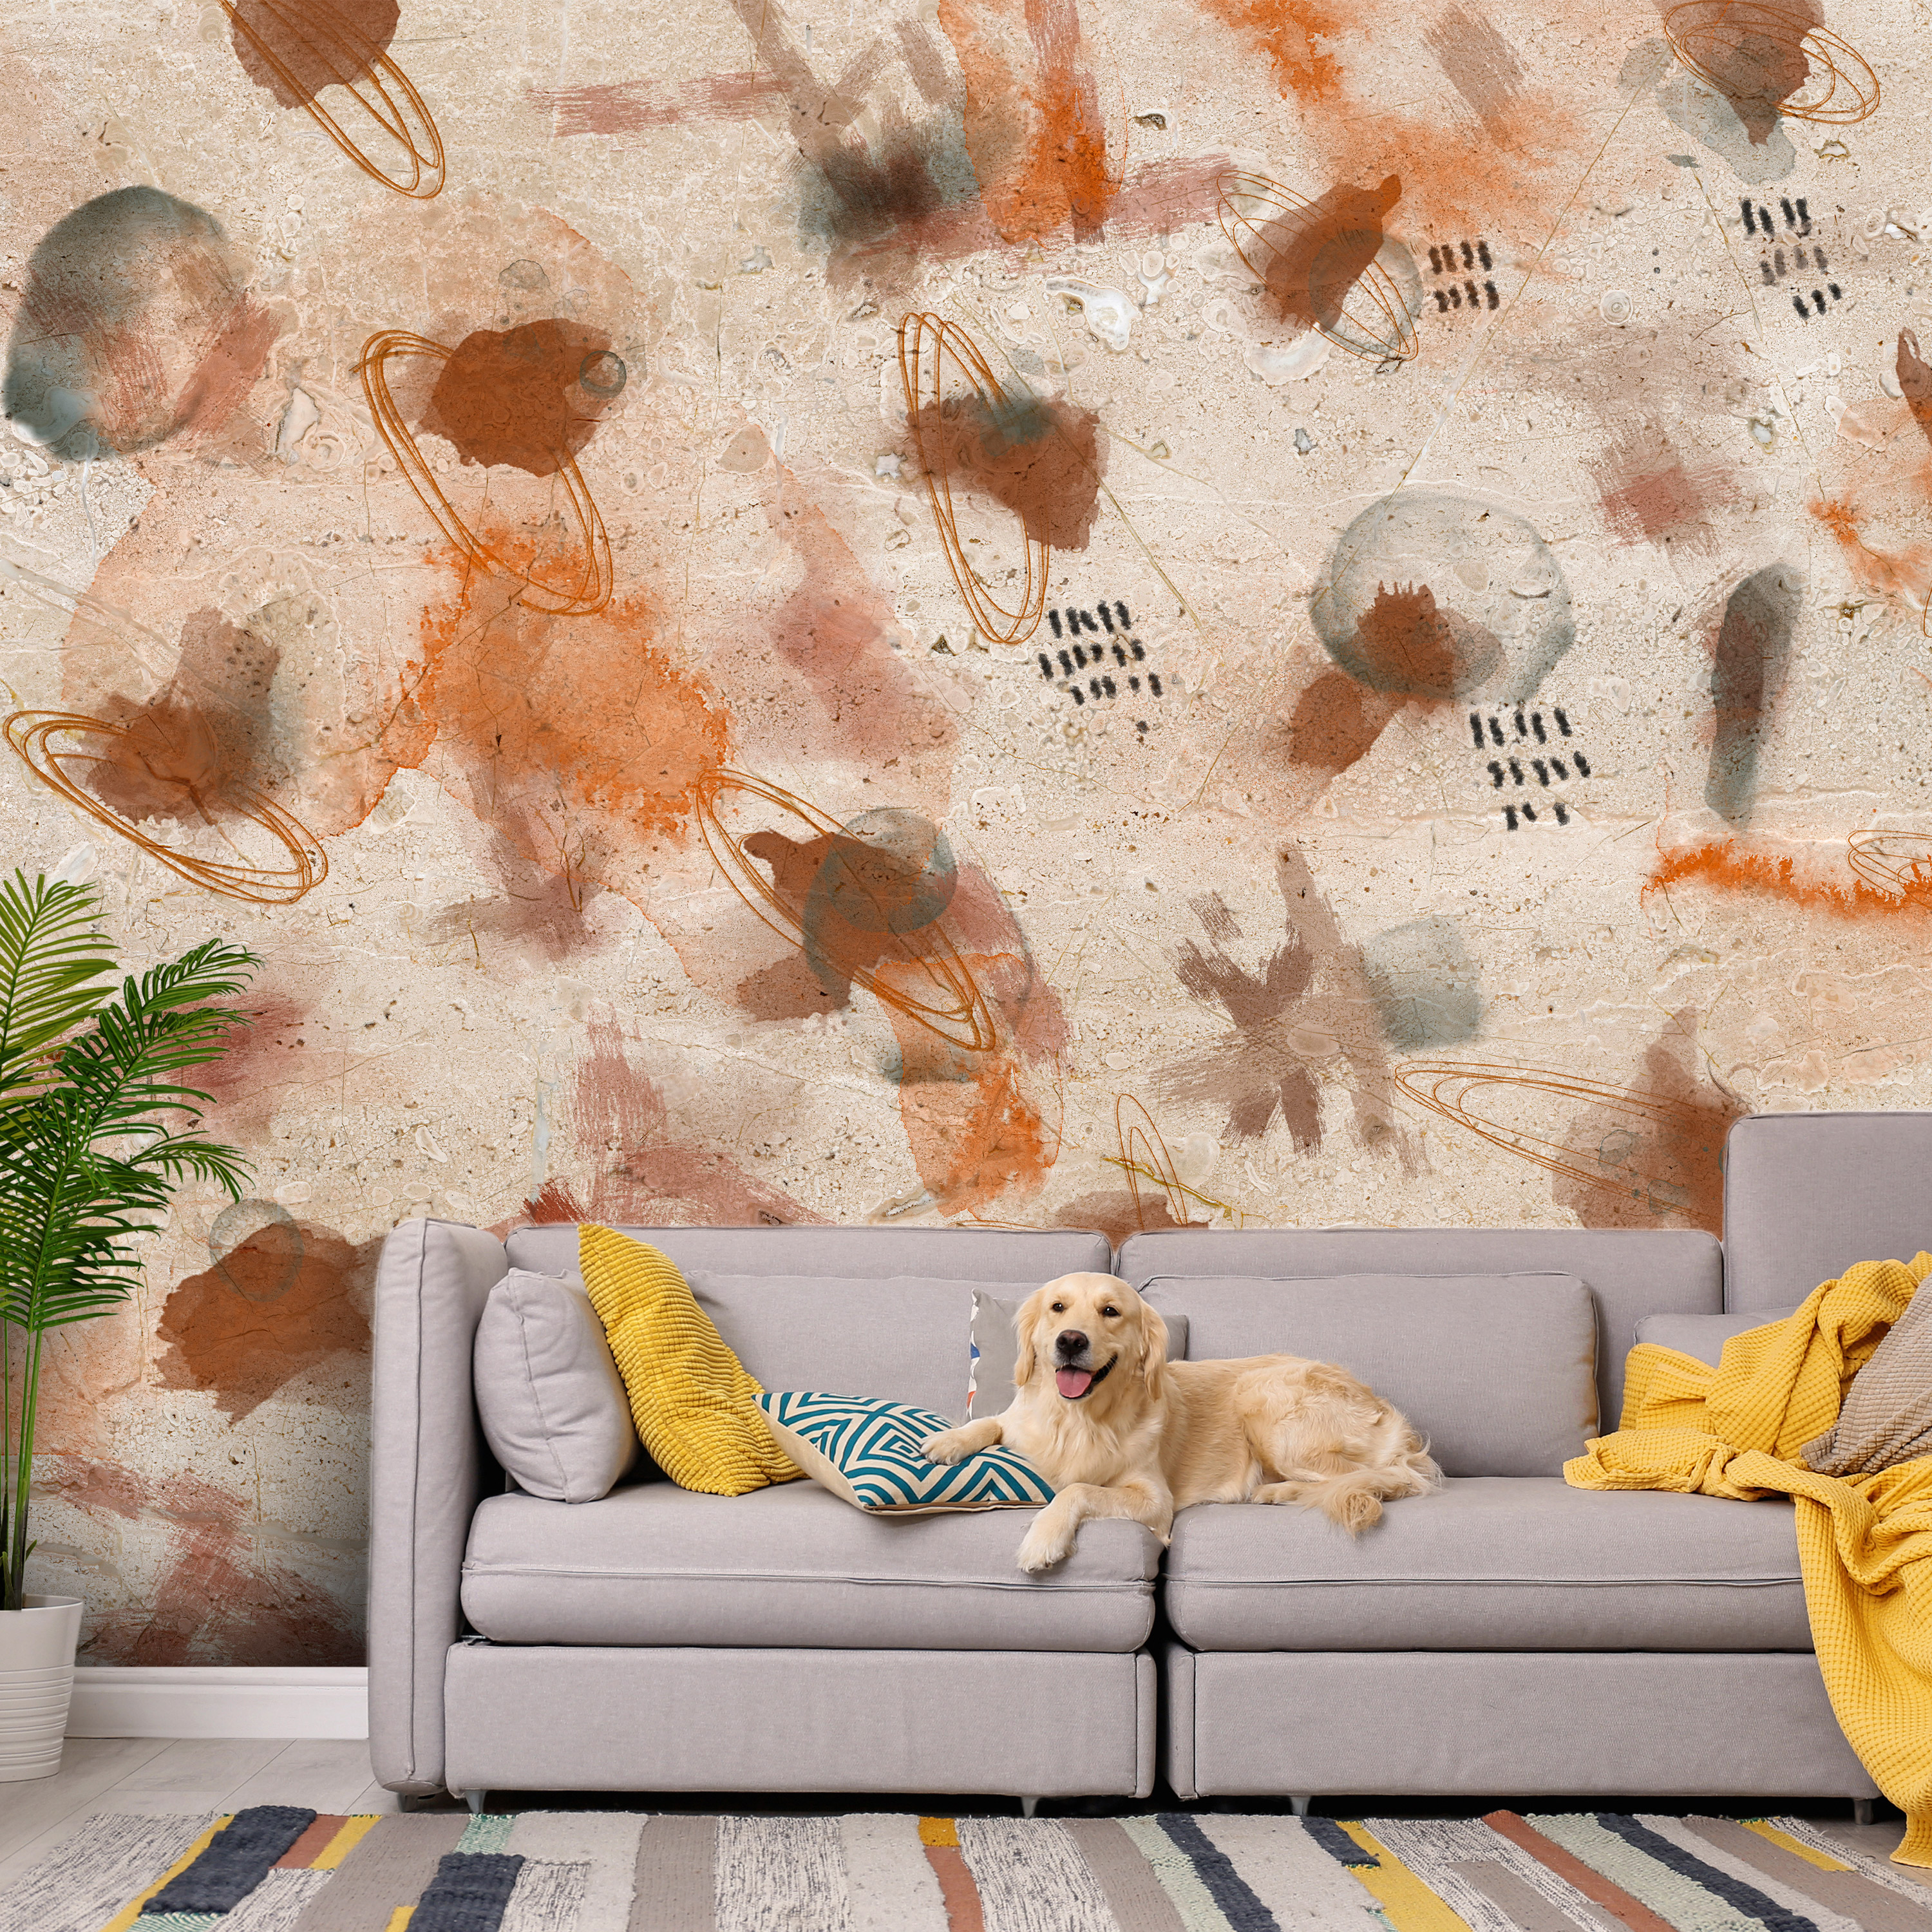 Self-adhesive Wallpaper - Painted on Stone - 245x175